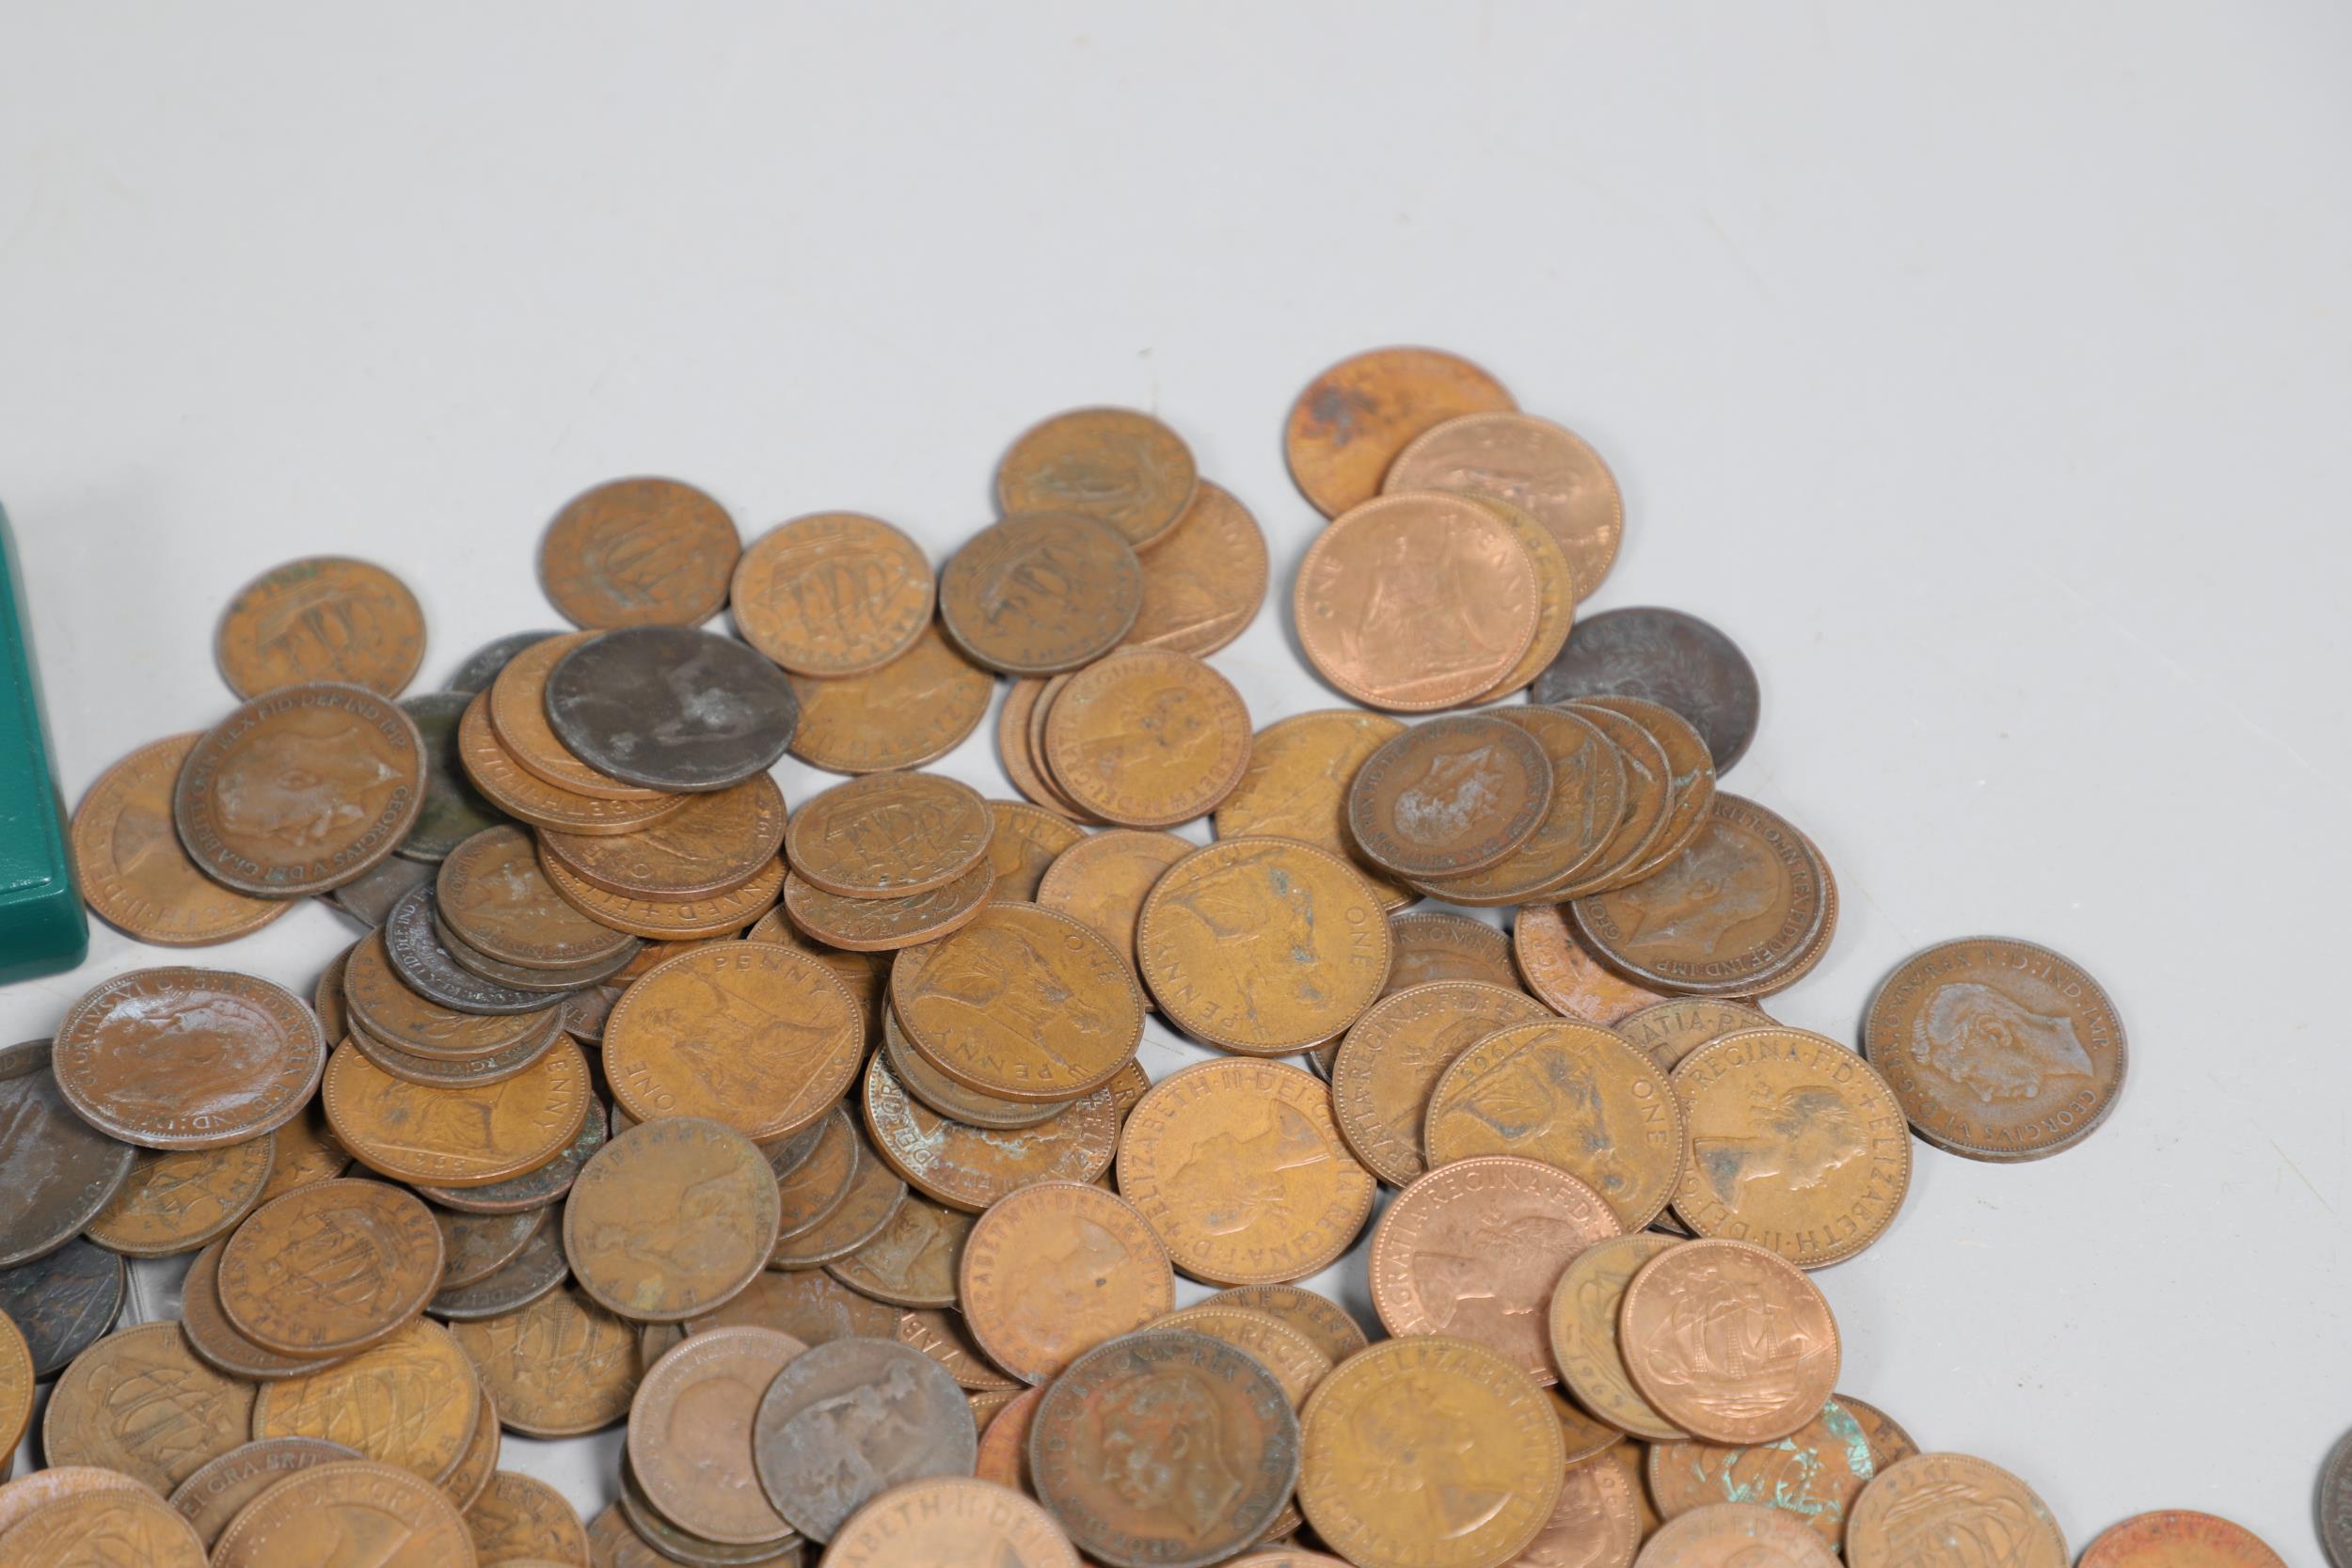 A LARGE COLLECTION OF WORLD COINS AND SIMILAR BRITISH COINS. - Image 18 of 20